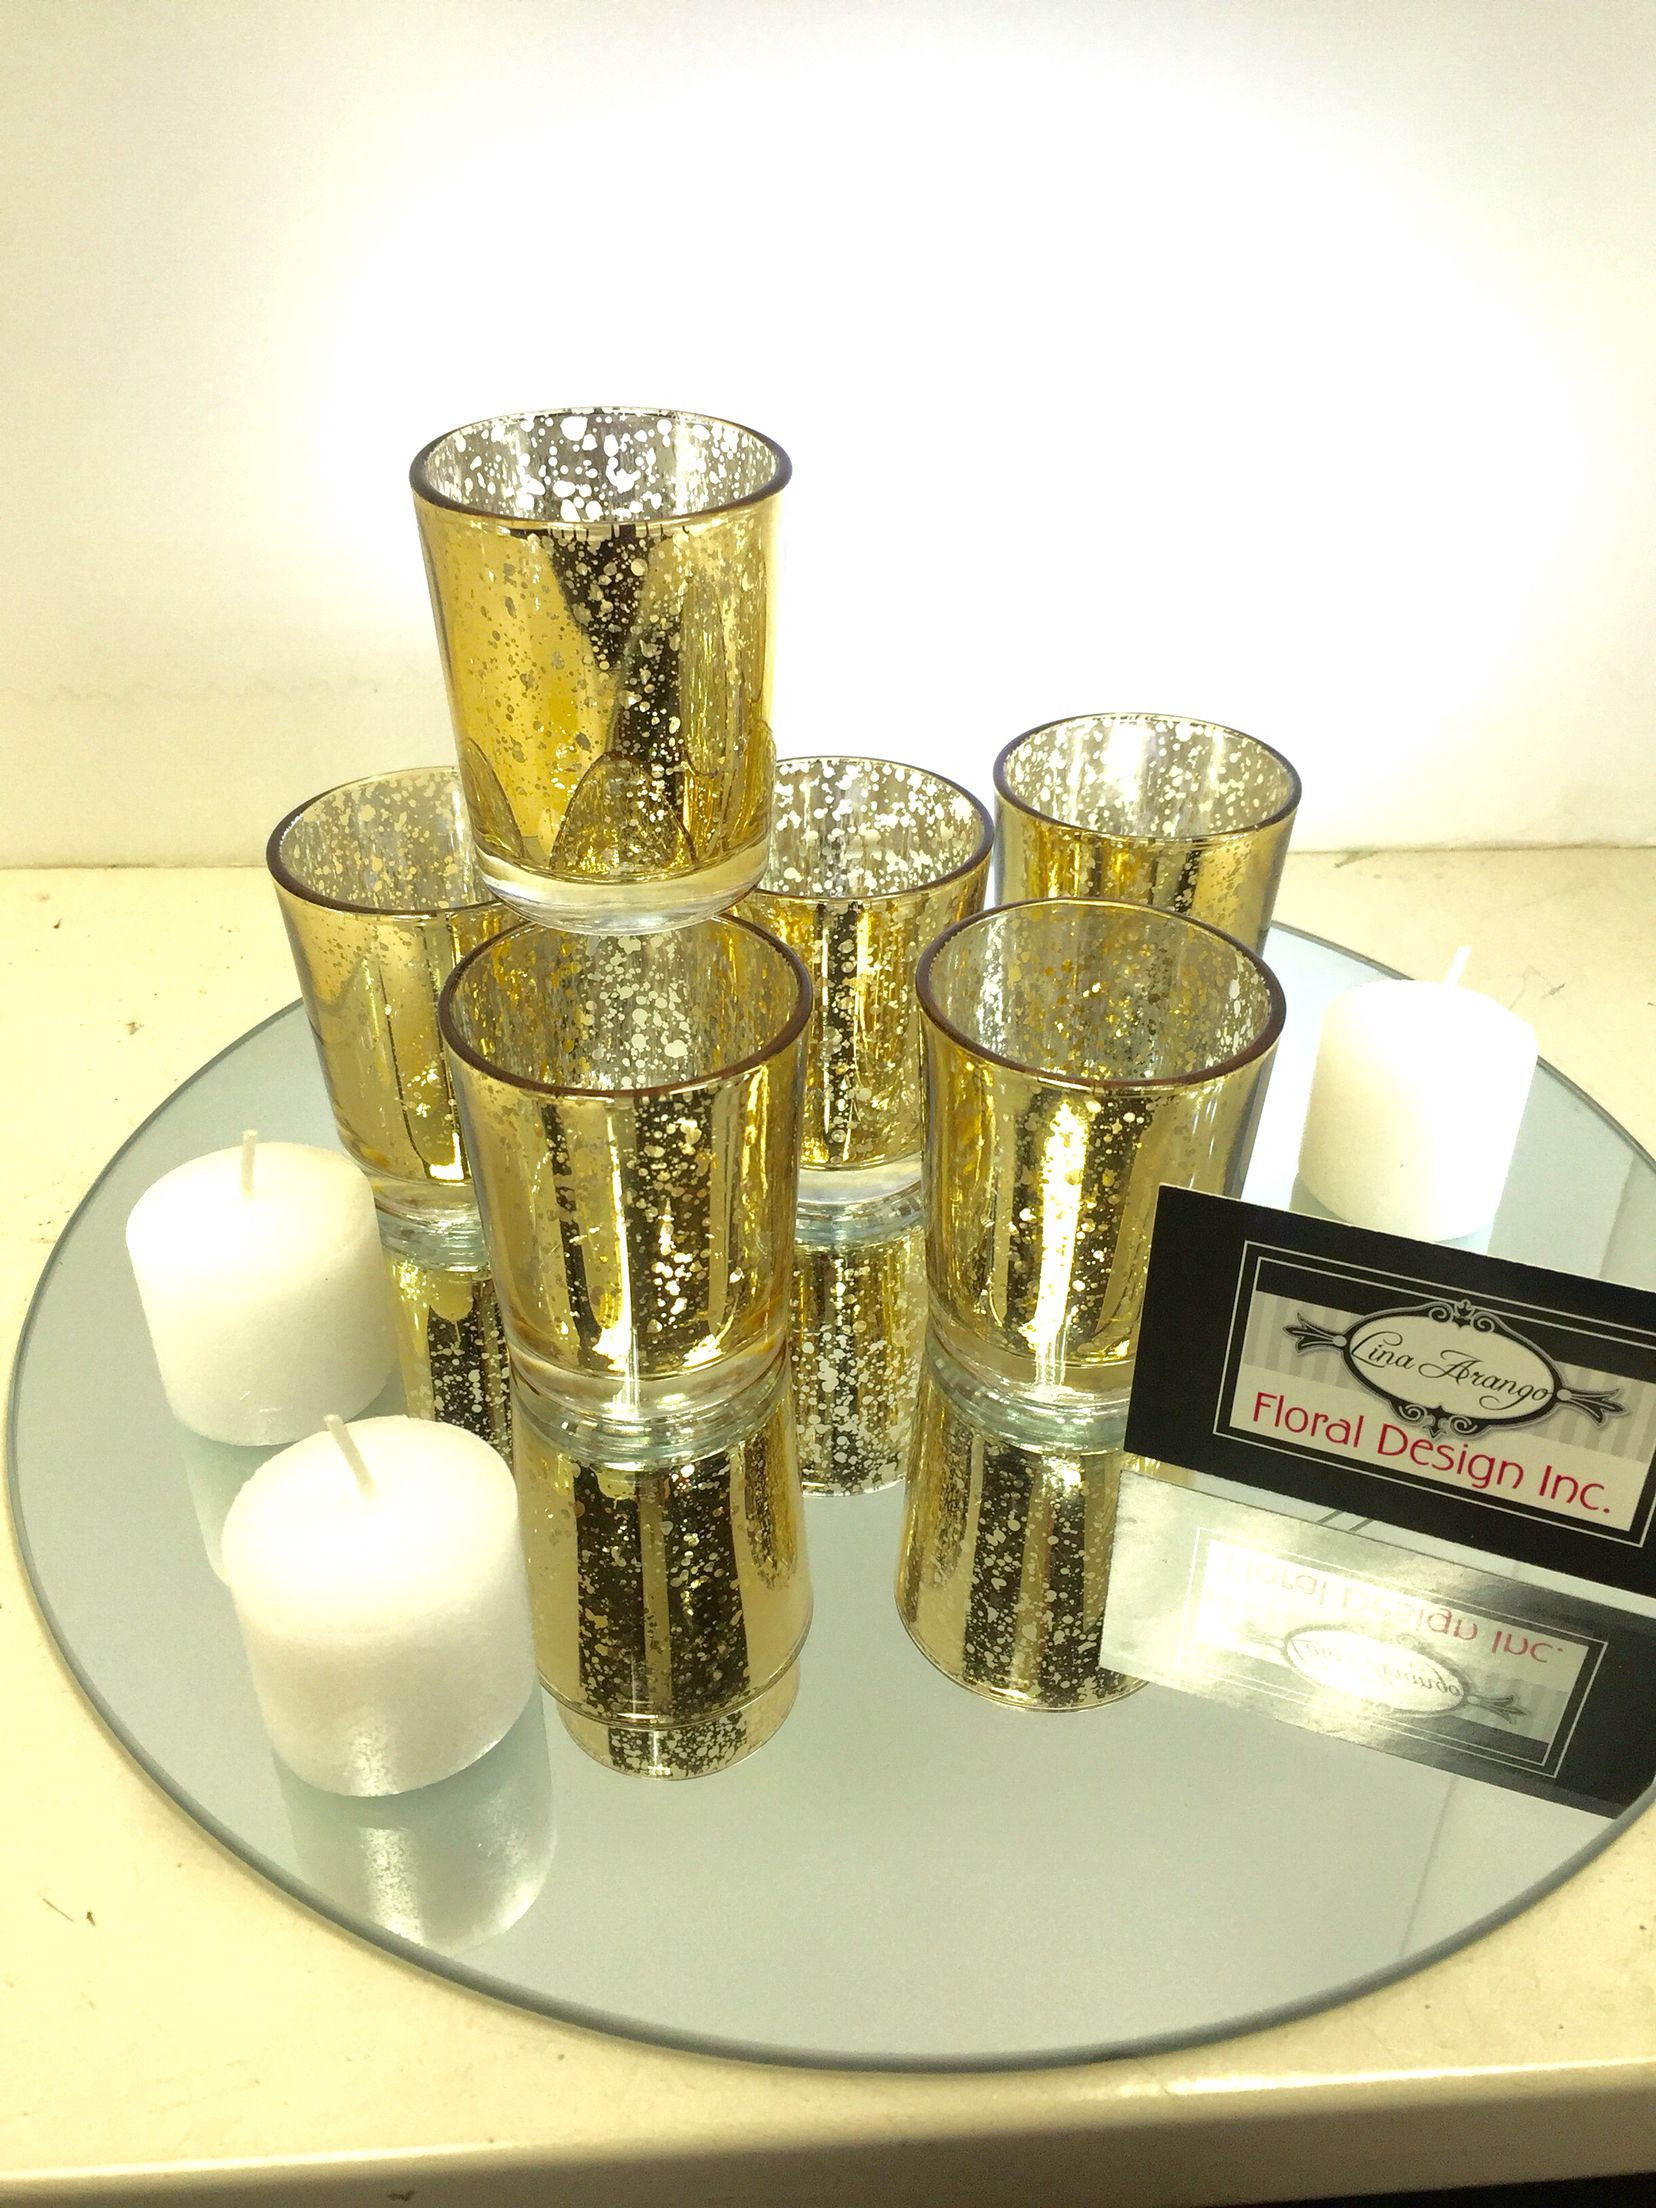 wholesale martini glass vases centerpieces of mercury glass votives glass vases wholesale and mercury glass with mercury glass votives